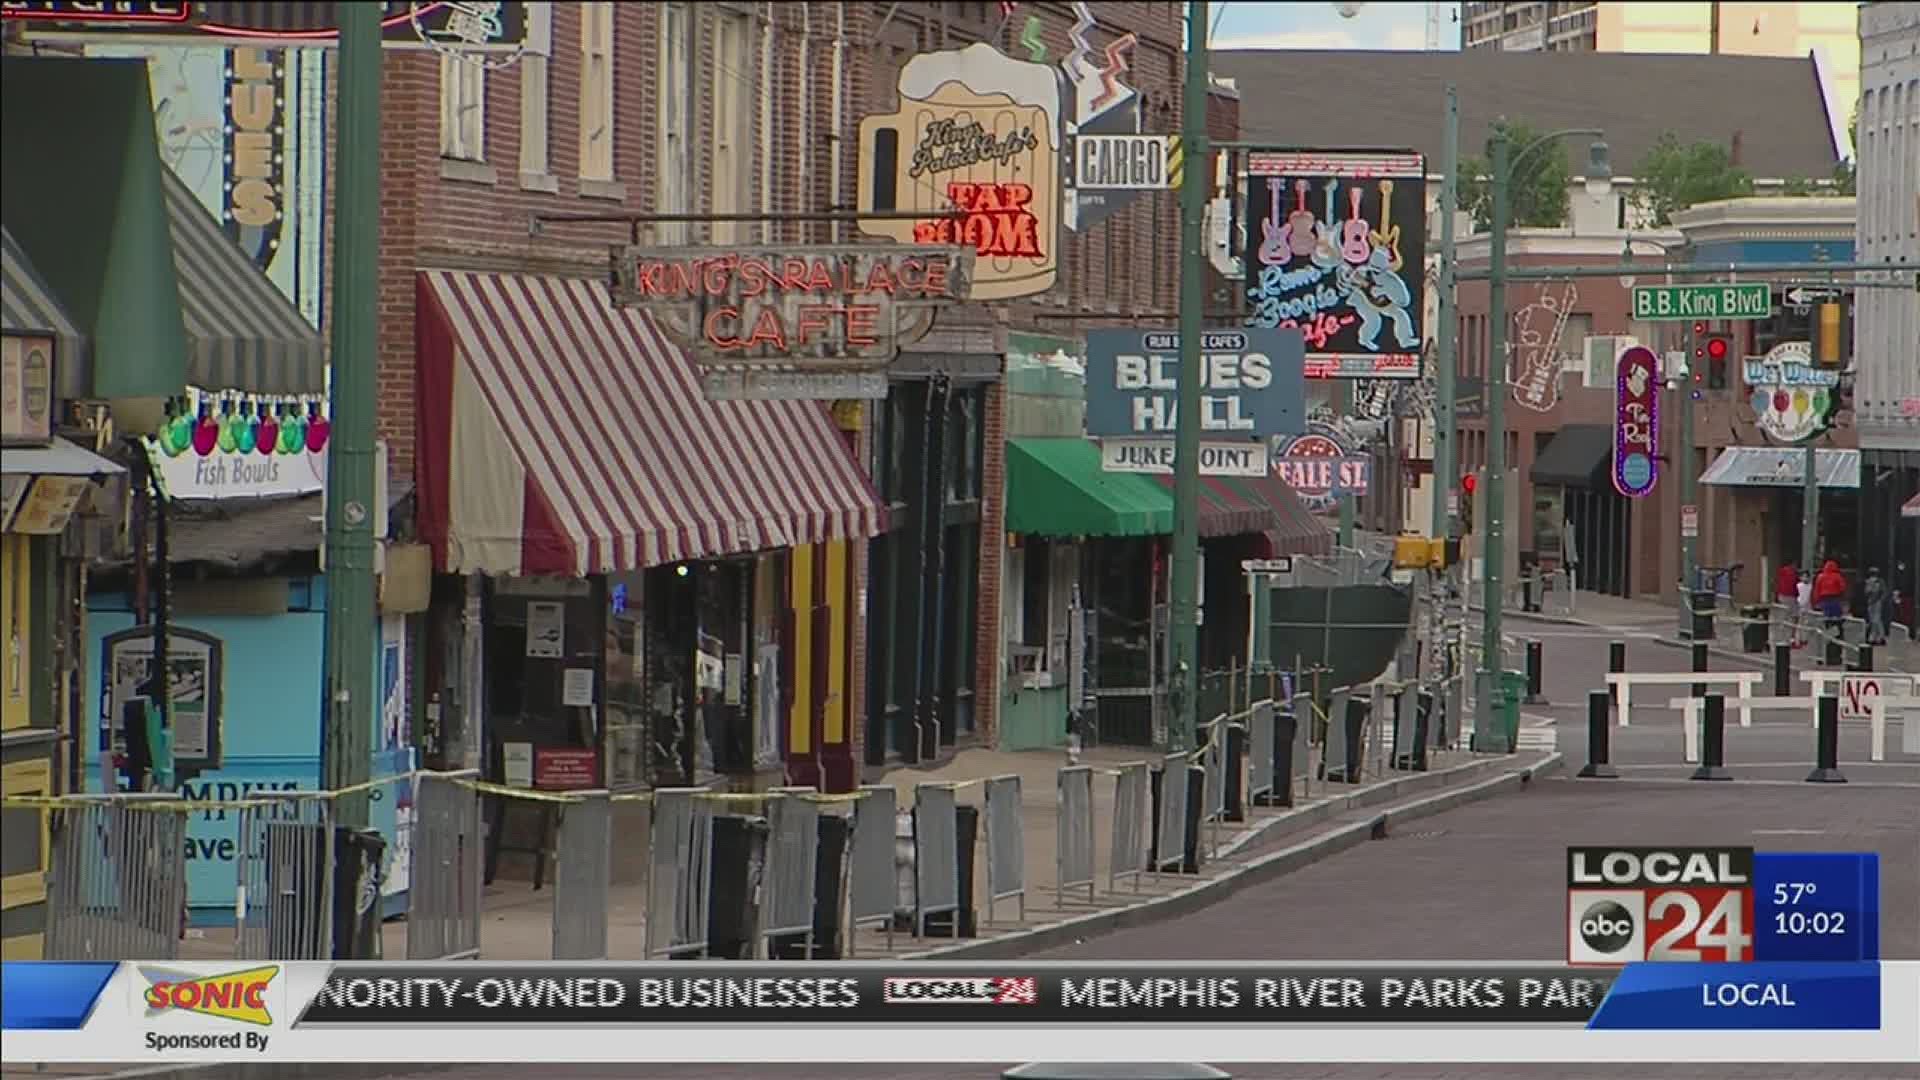 Beale Street is now open again but with all the restrictions, it is creating concerns for both owners and customers.